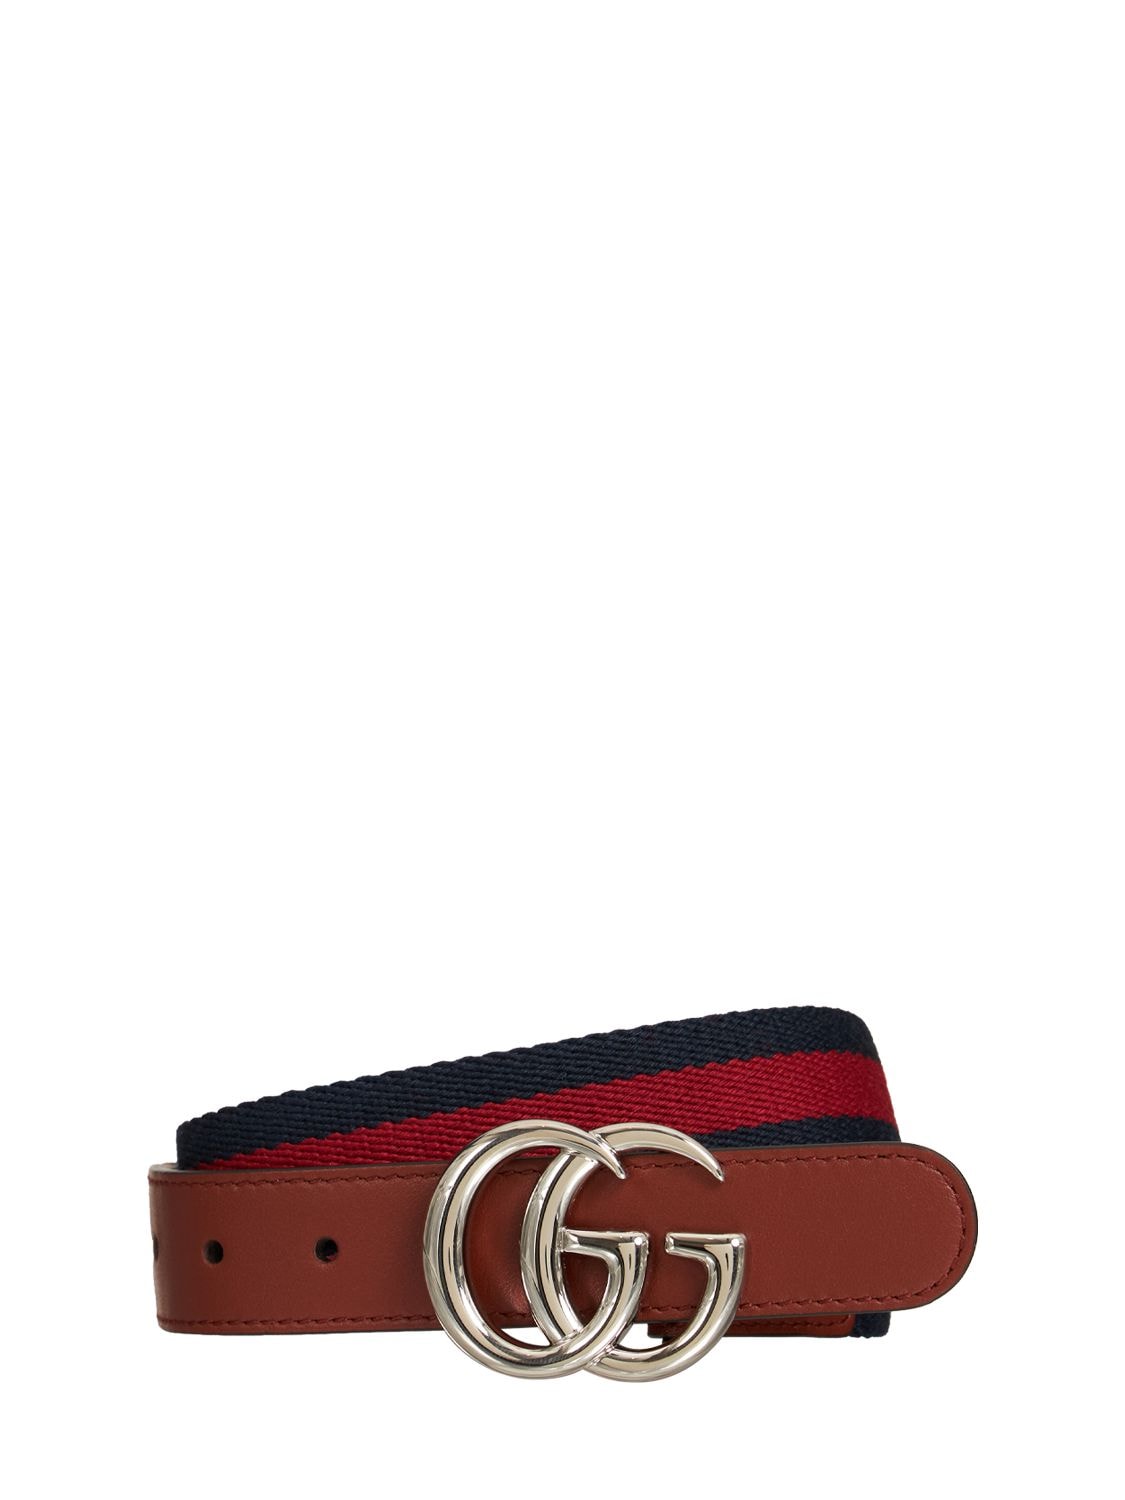 Gucci Babies' Logo Belt In Red